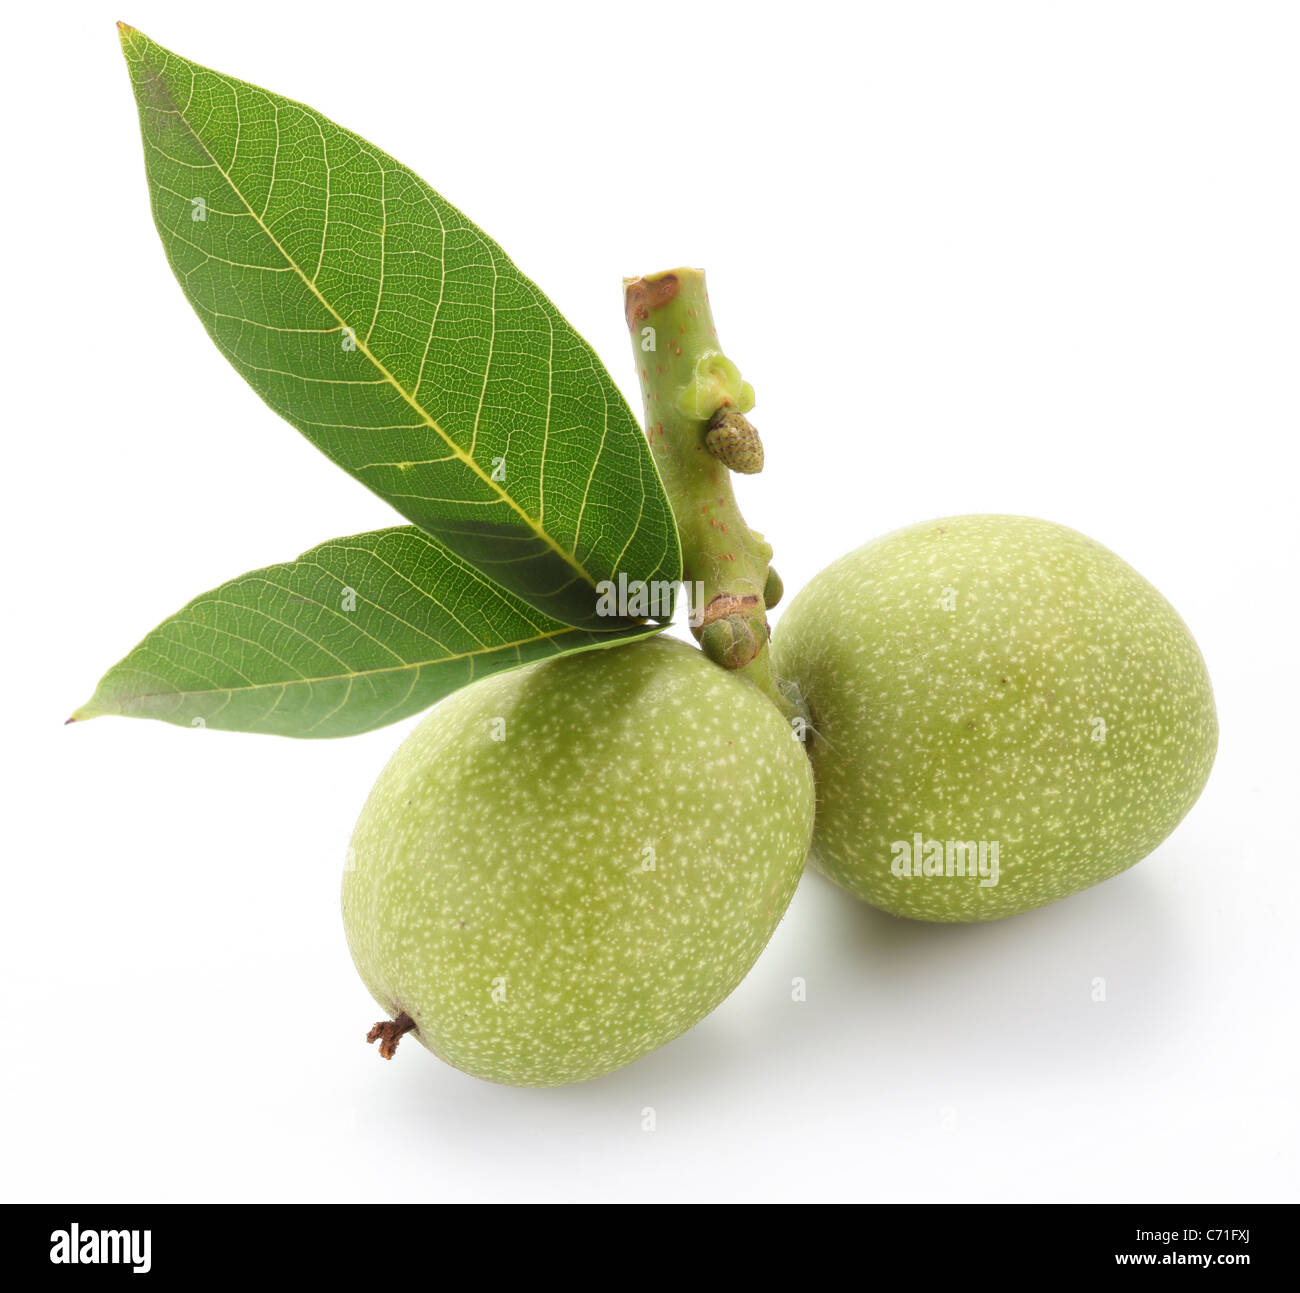 Green walnuts with leaves isolated on a white background. Stock Photo